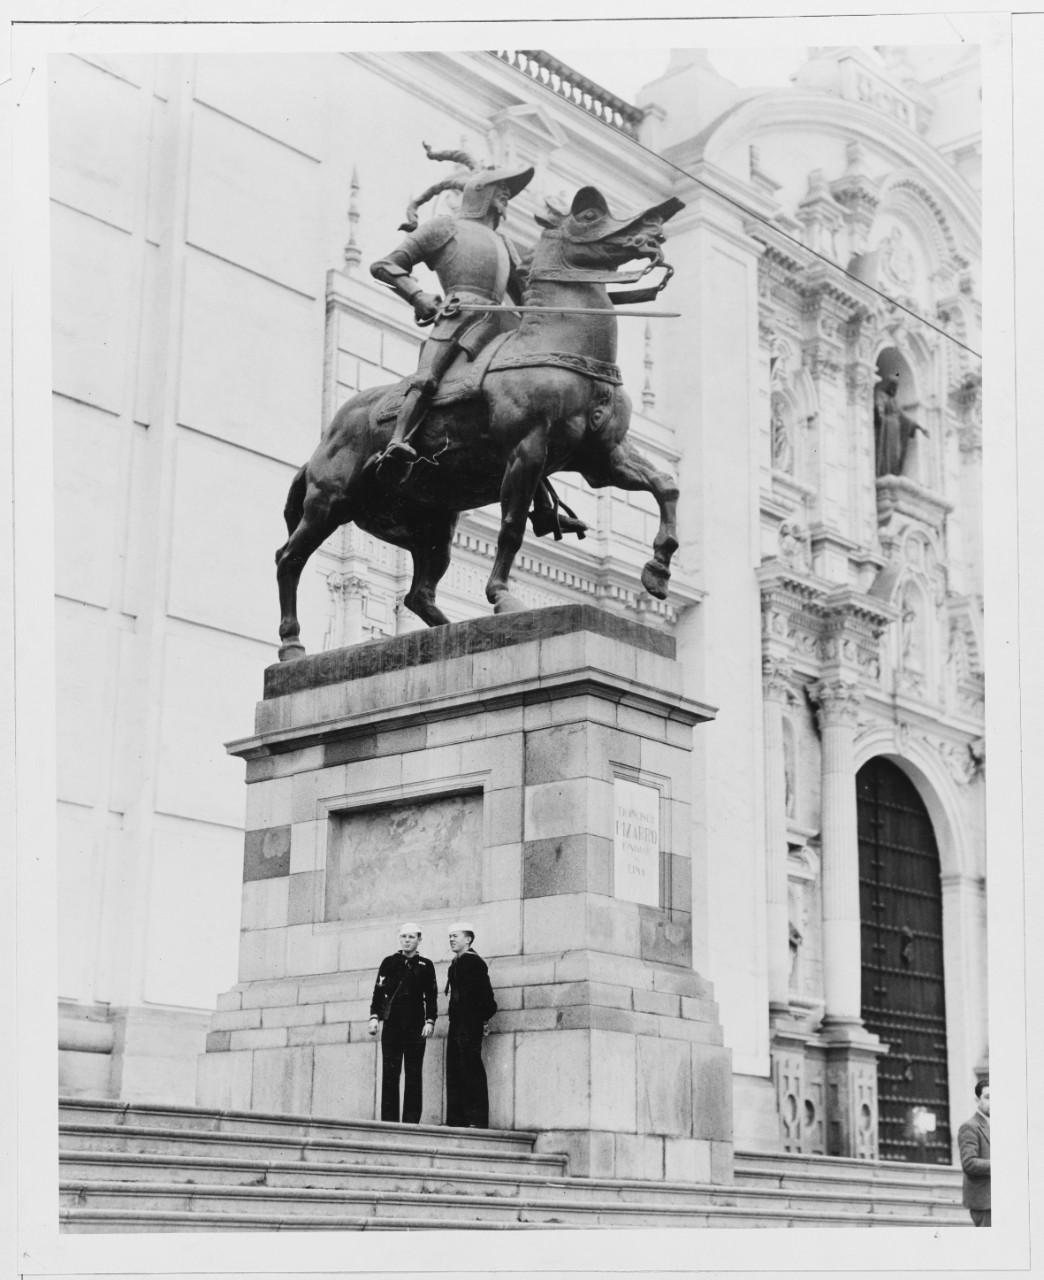 Lima, Peru. Bluejackets standing before the Statue of Pizzaro. January 1942